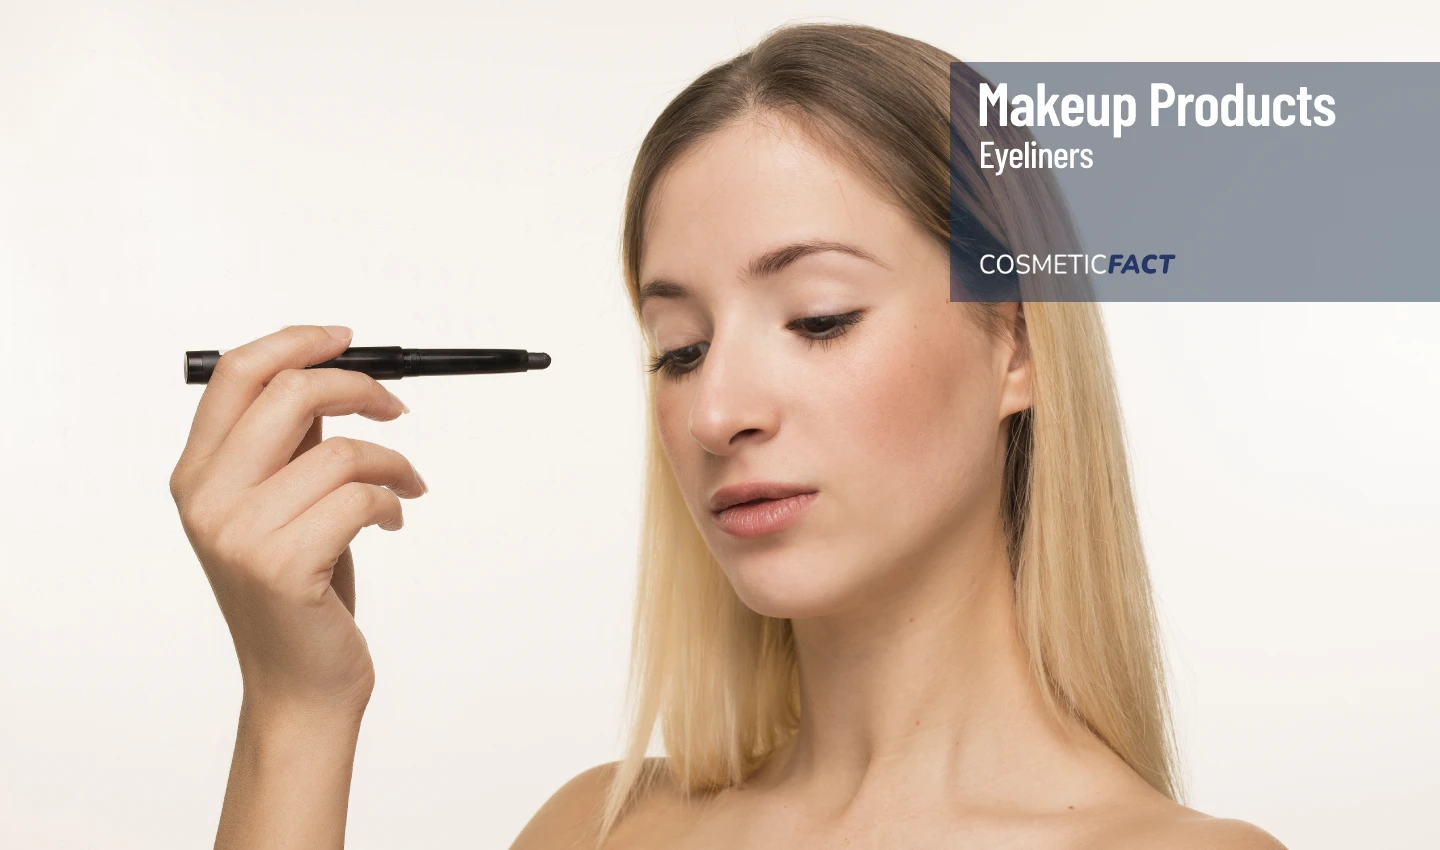 A young woman applying eyeliner with an eyebrow pencil, showcasing the importance of using the right tools and techniques to achieve long-lasting eyeliner that stays put all day.